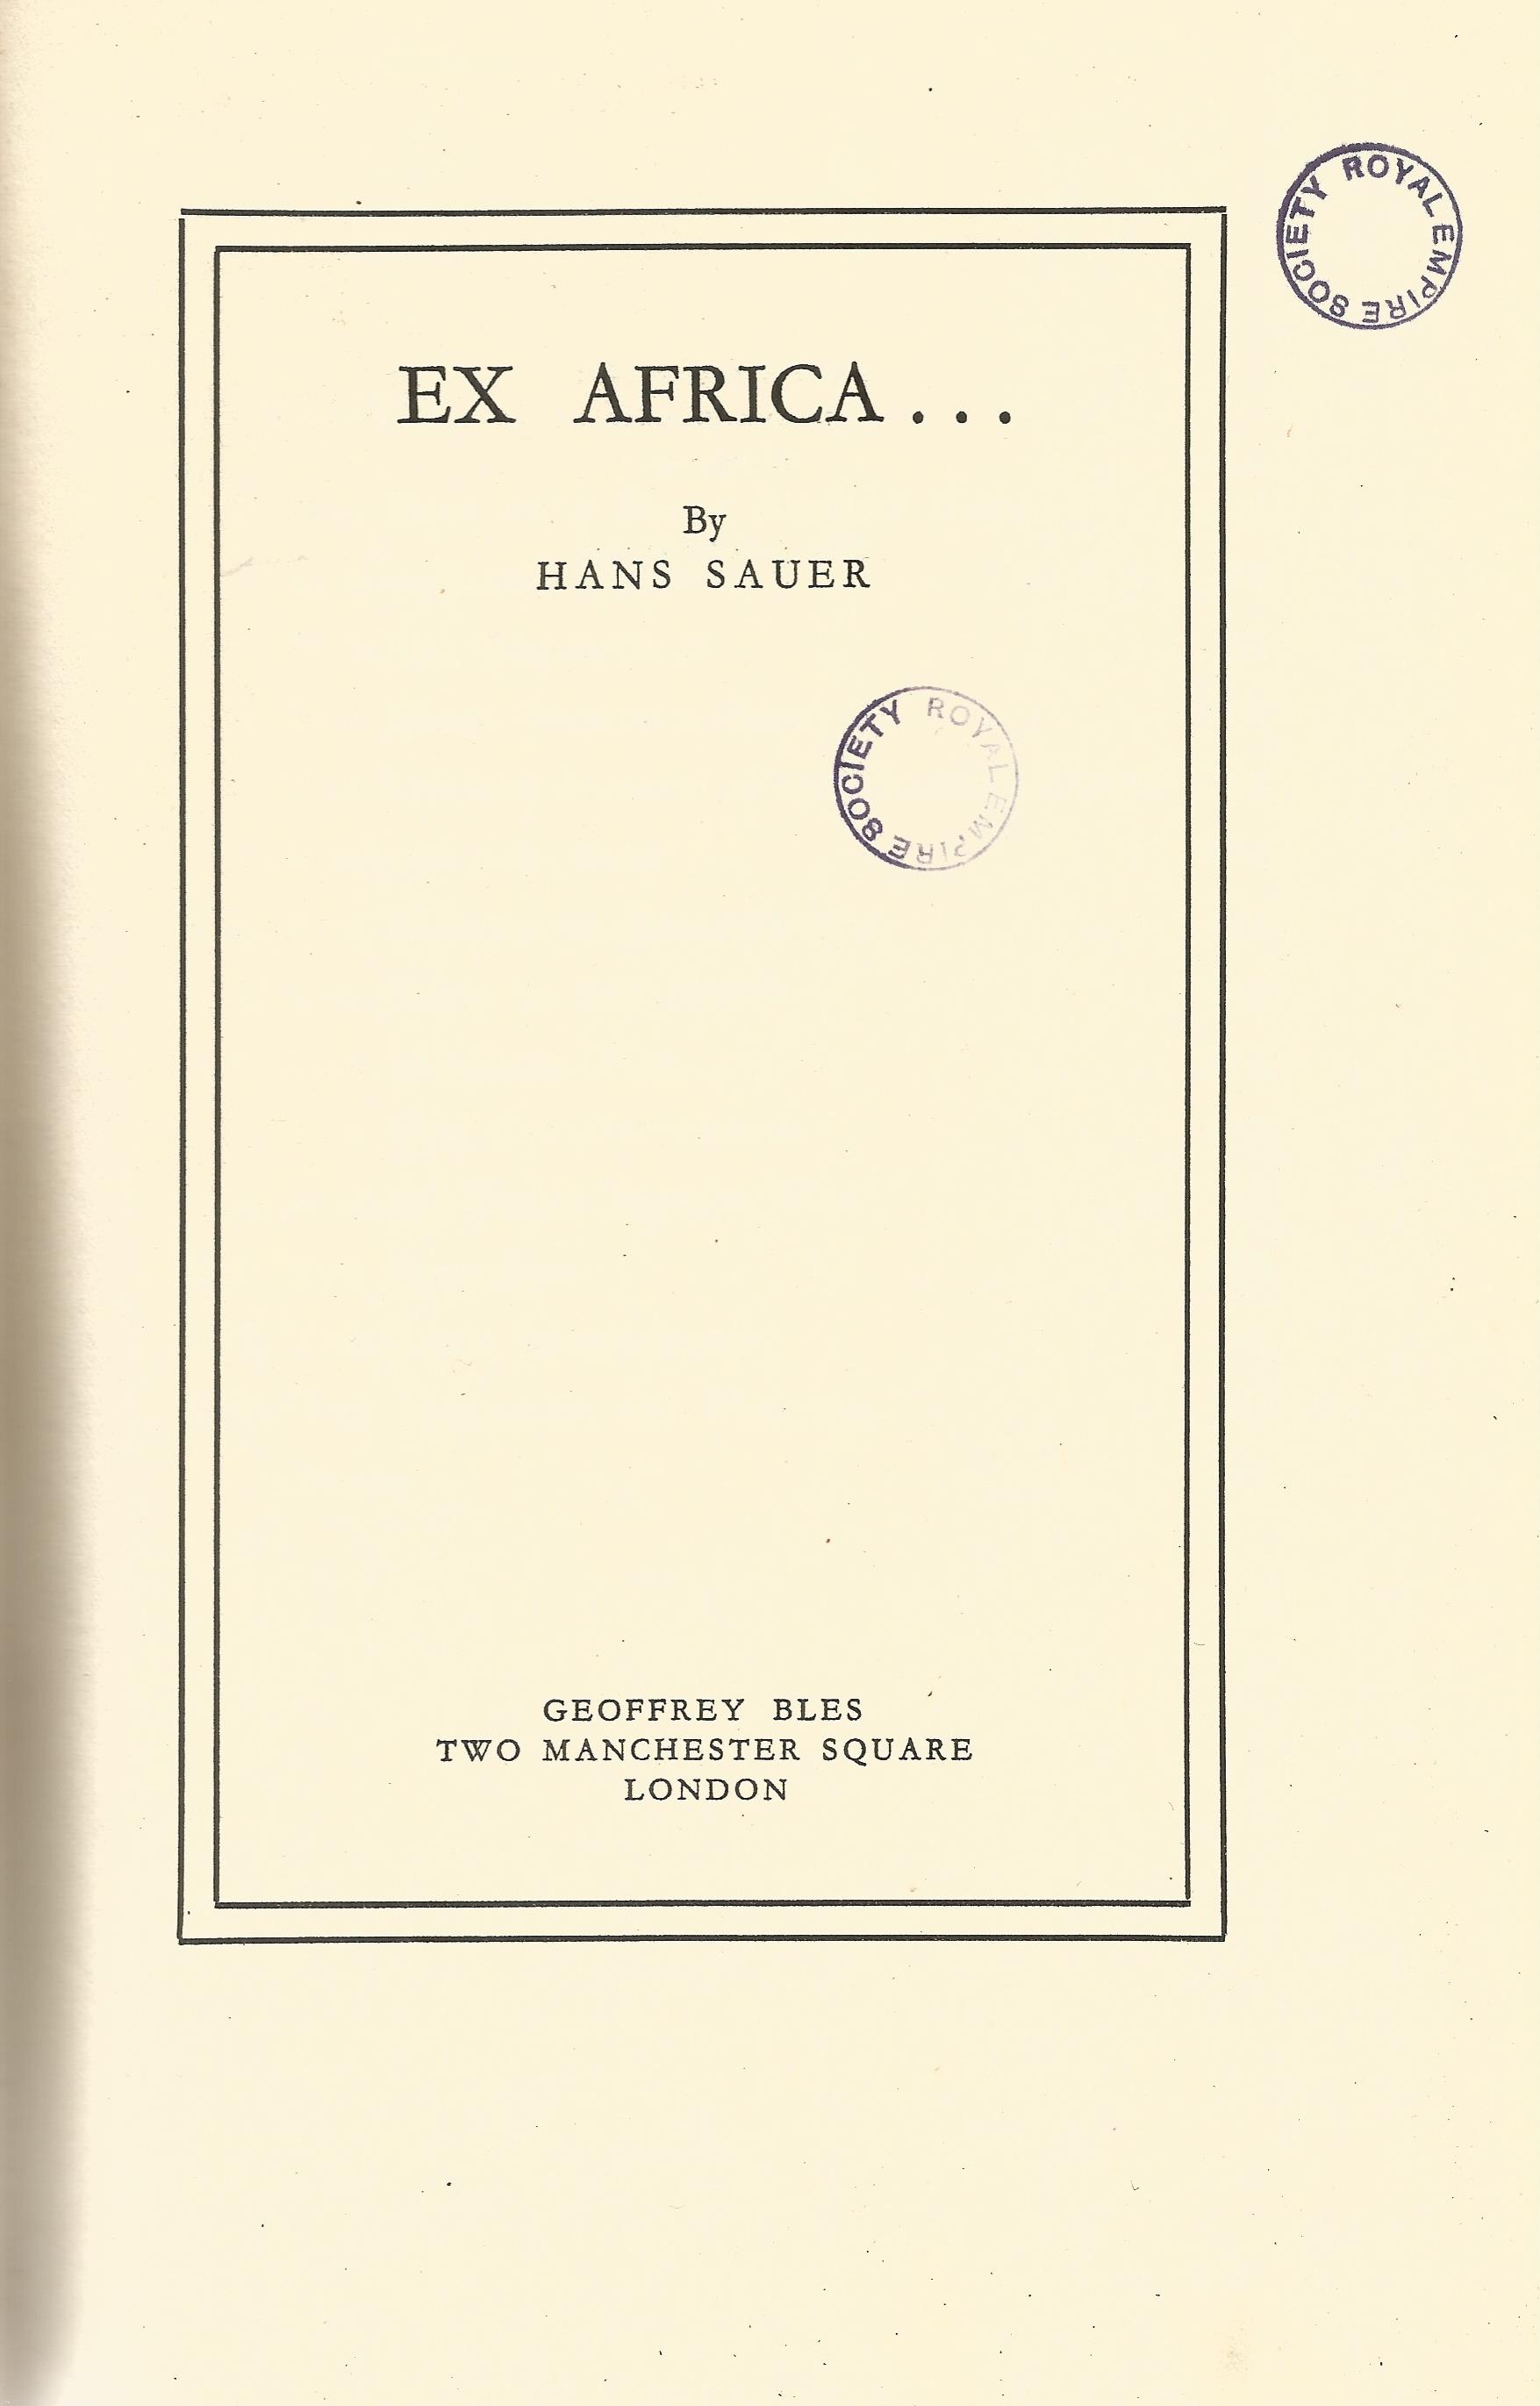 Ex Africa… by Hans Sauer 1937 Hardback Book First Edition published by Geoffrey Bless some ageing - Image 2 of 3